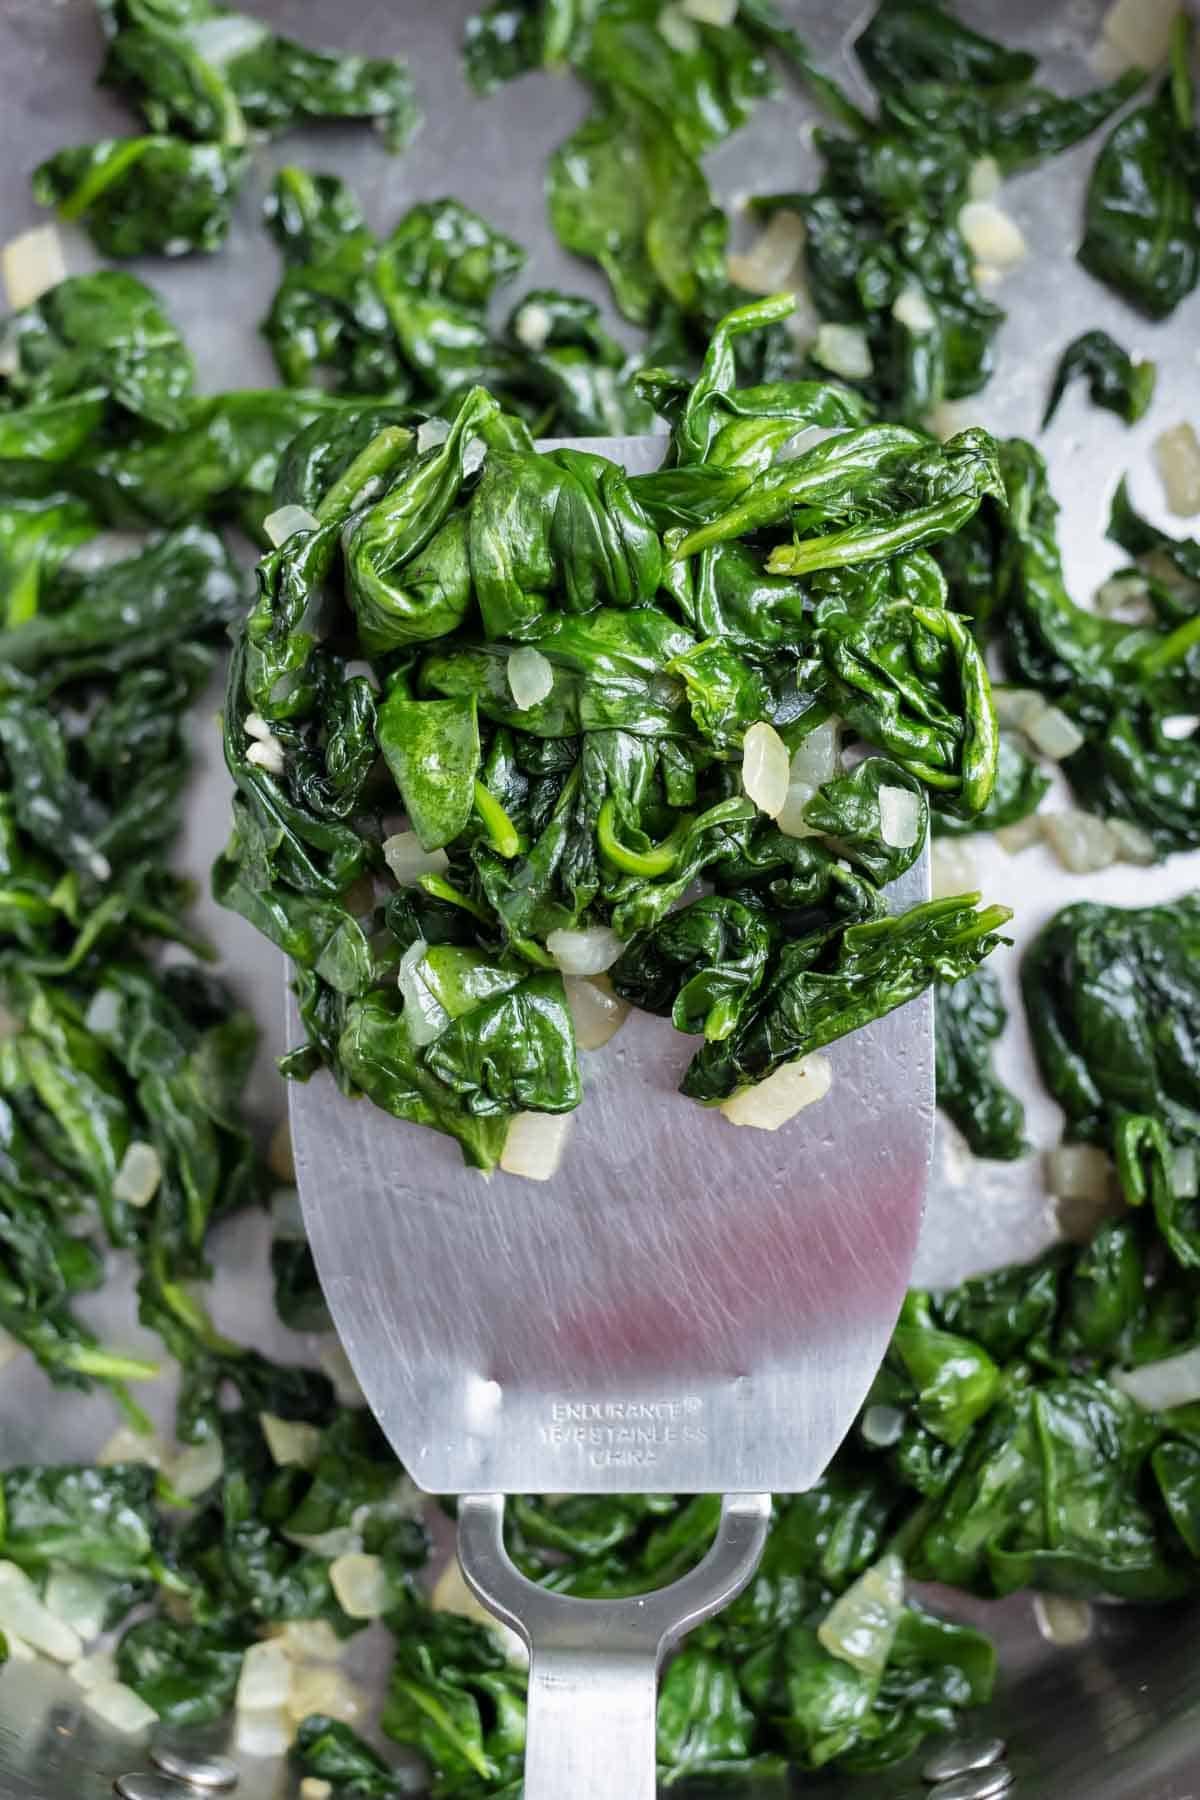 Spinach is sautéed on the stove in a pan.